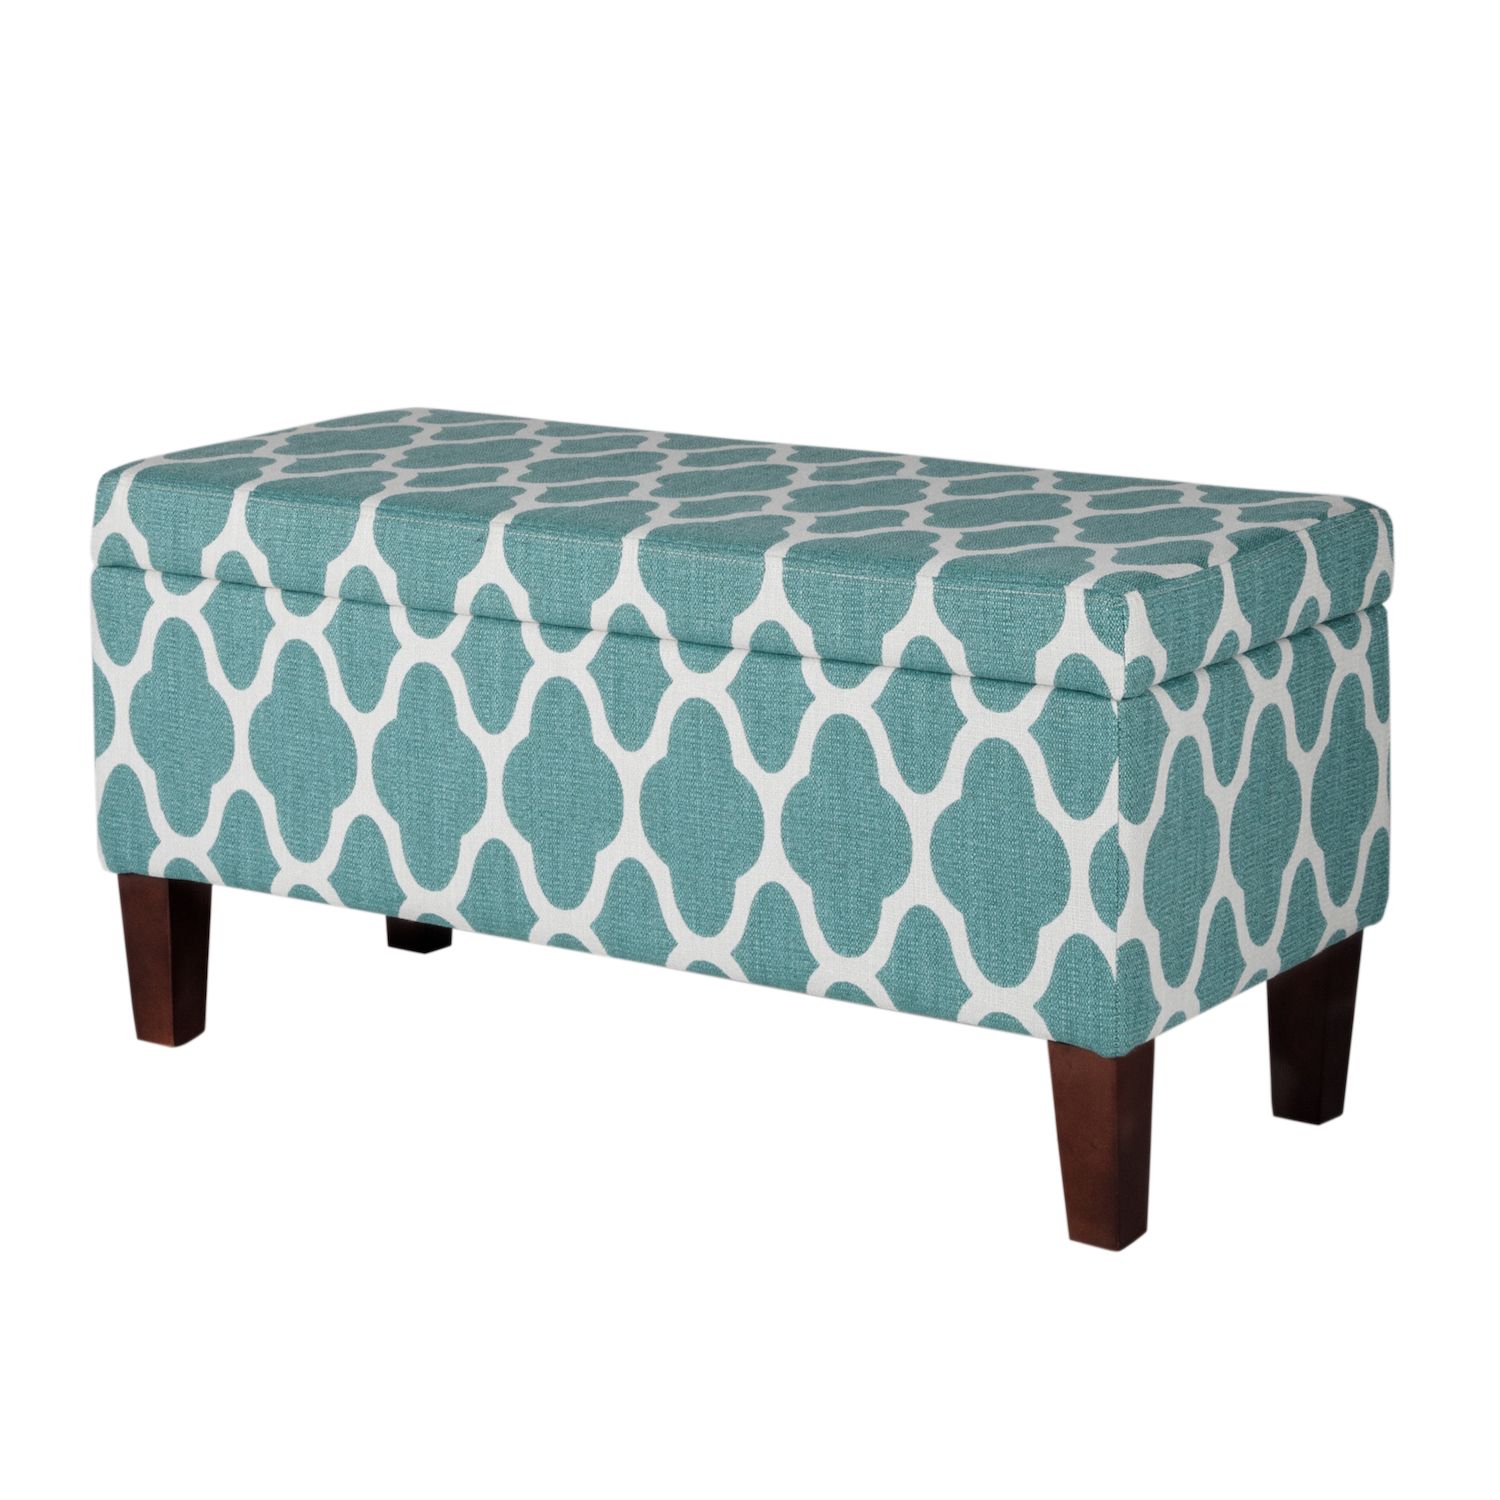 Image for HomePop Geometric Storage Bench at Kohl's.